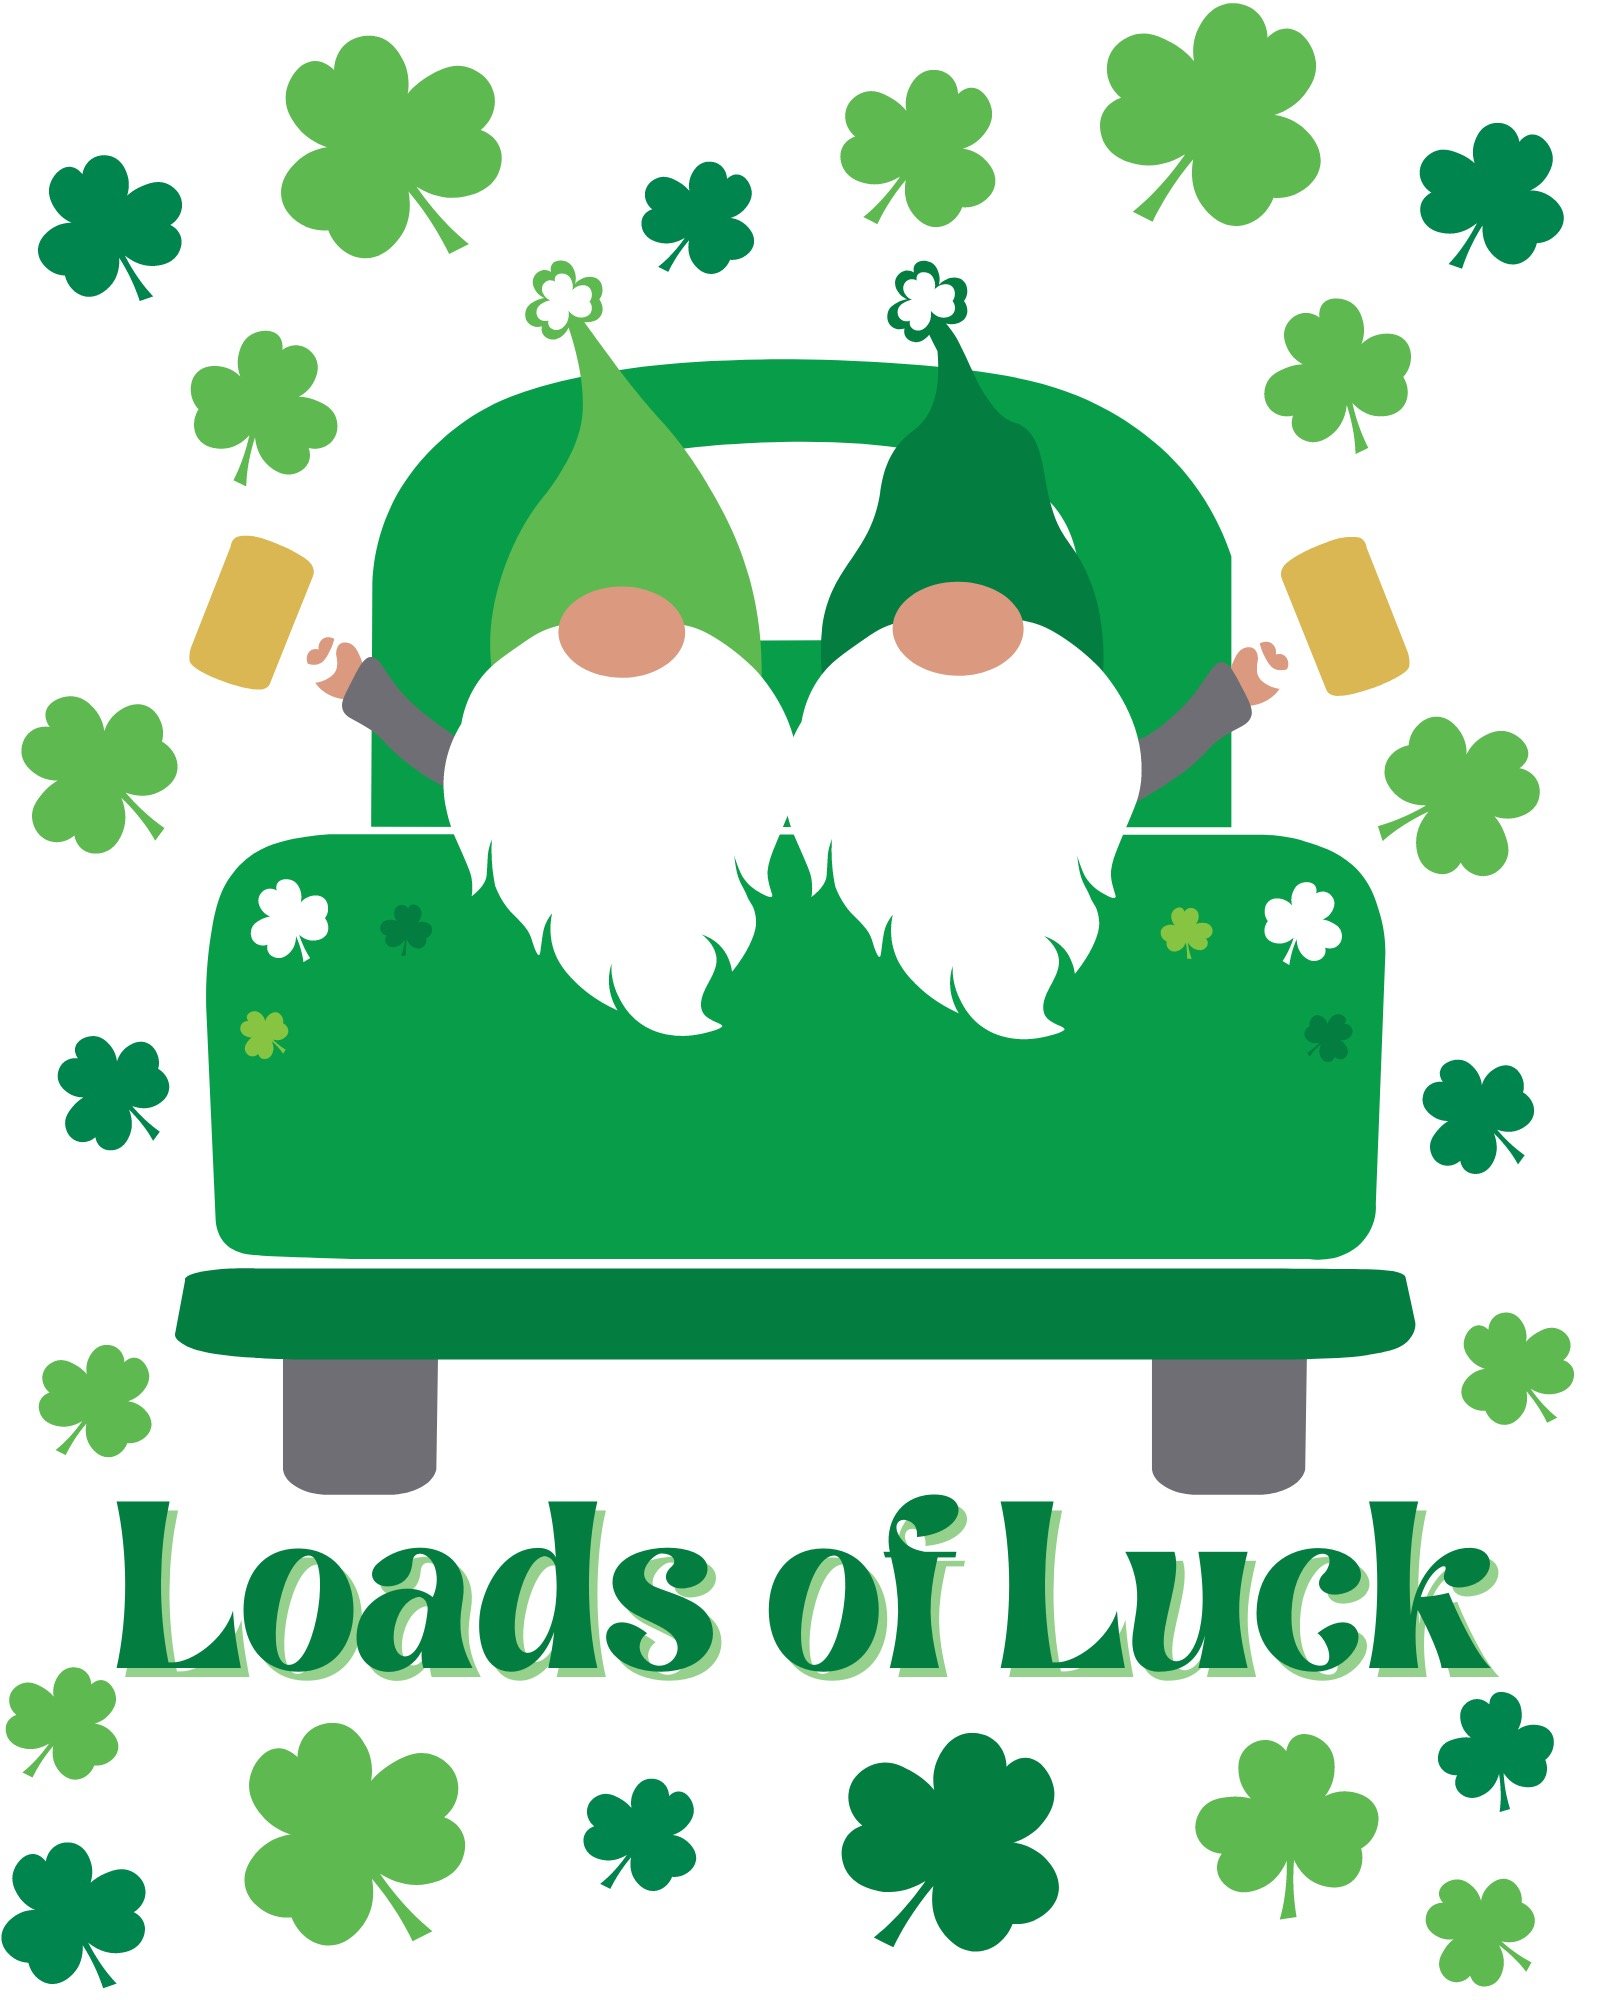 gnomes in a truck with shamrocks and the phrase "loads of luck"